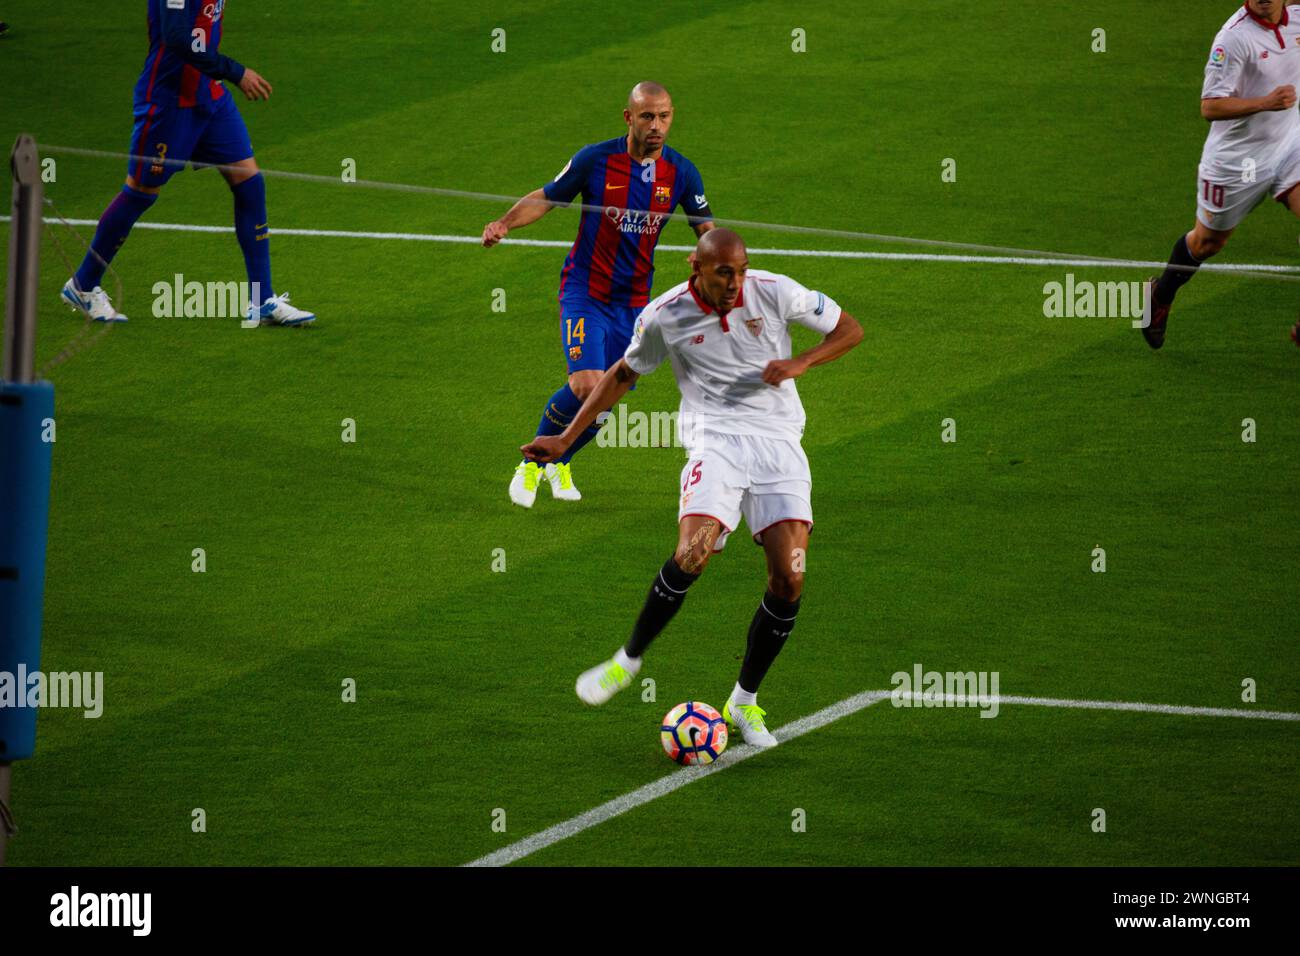 NZONZI, SEVILLA, 2017: Steven Nzonzi of Sevilla shoots. Barcelona FC v Sevilla FC at Camp Nou, Barcelona on 5 April 2017. Photo: Rob Watkins. Barca won the game 3-0 with three goals in the first 33 minutes. The game was played in a deluge of rain during a massive spring storm. Stock Photo